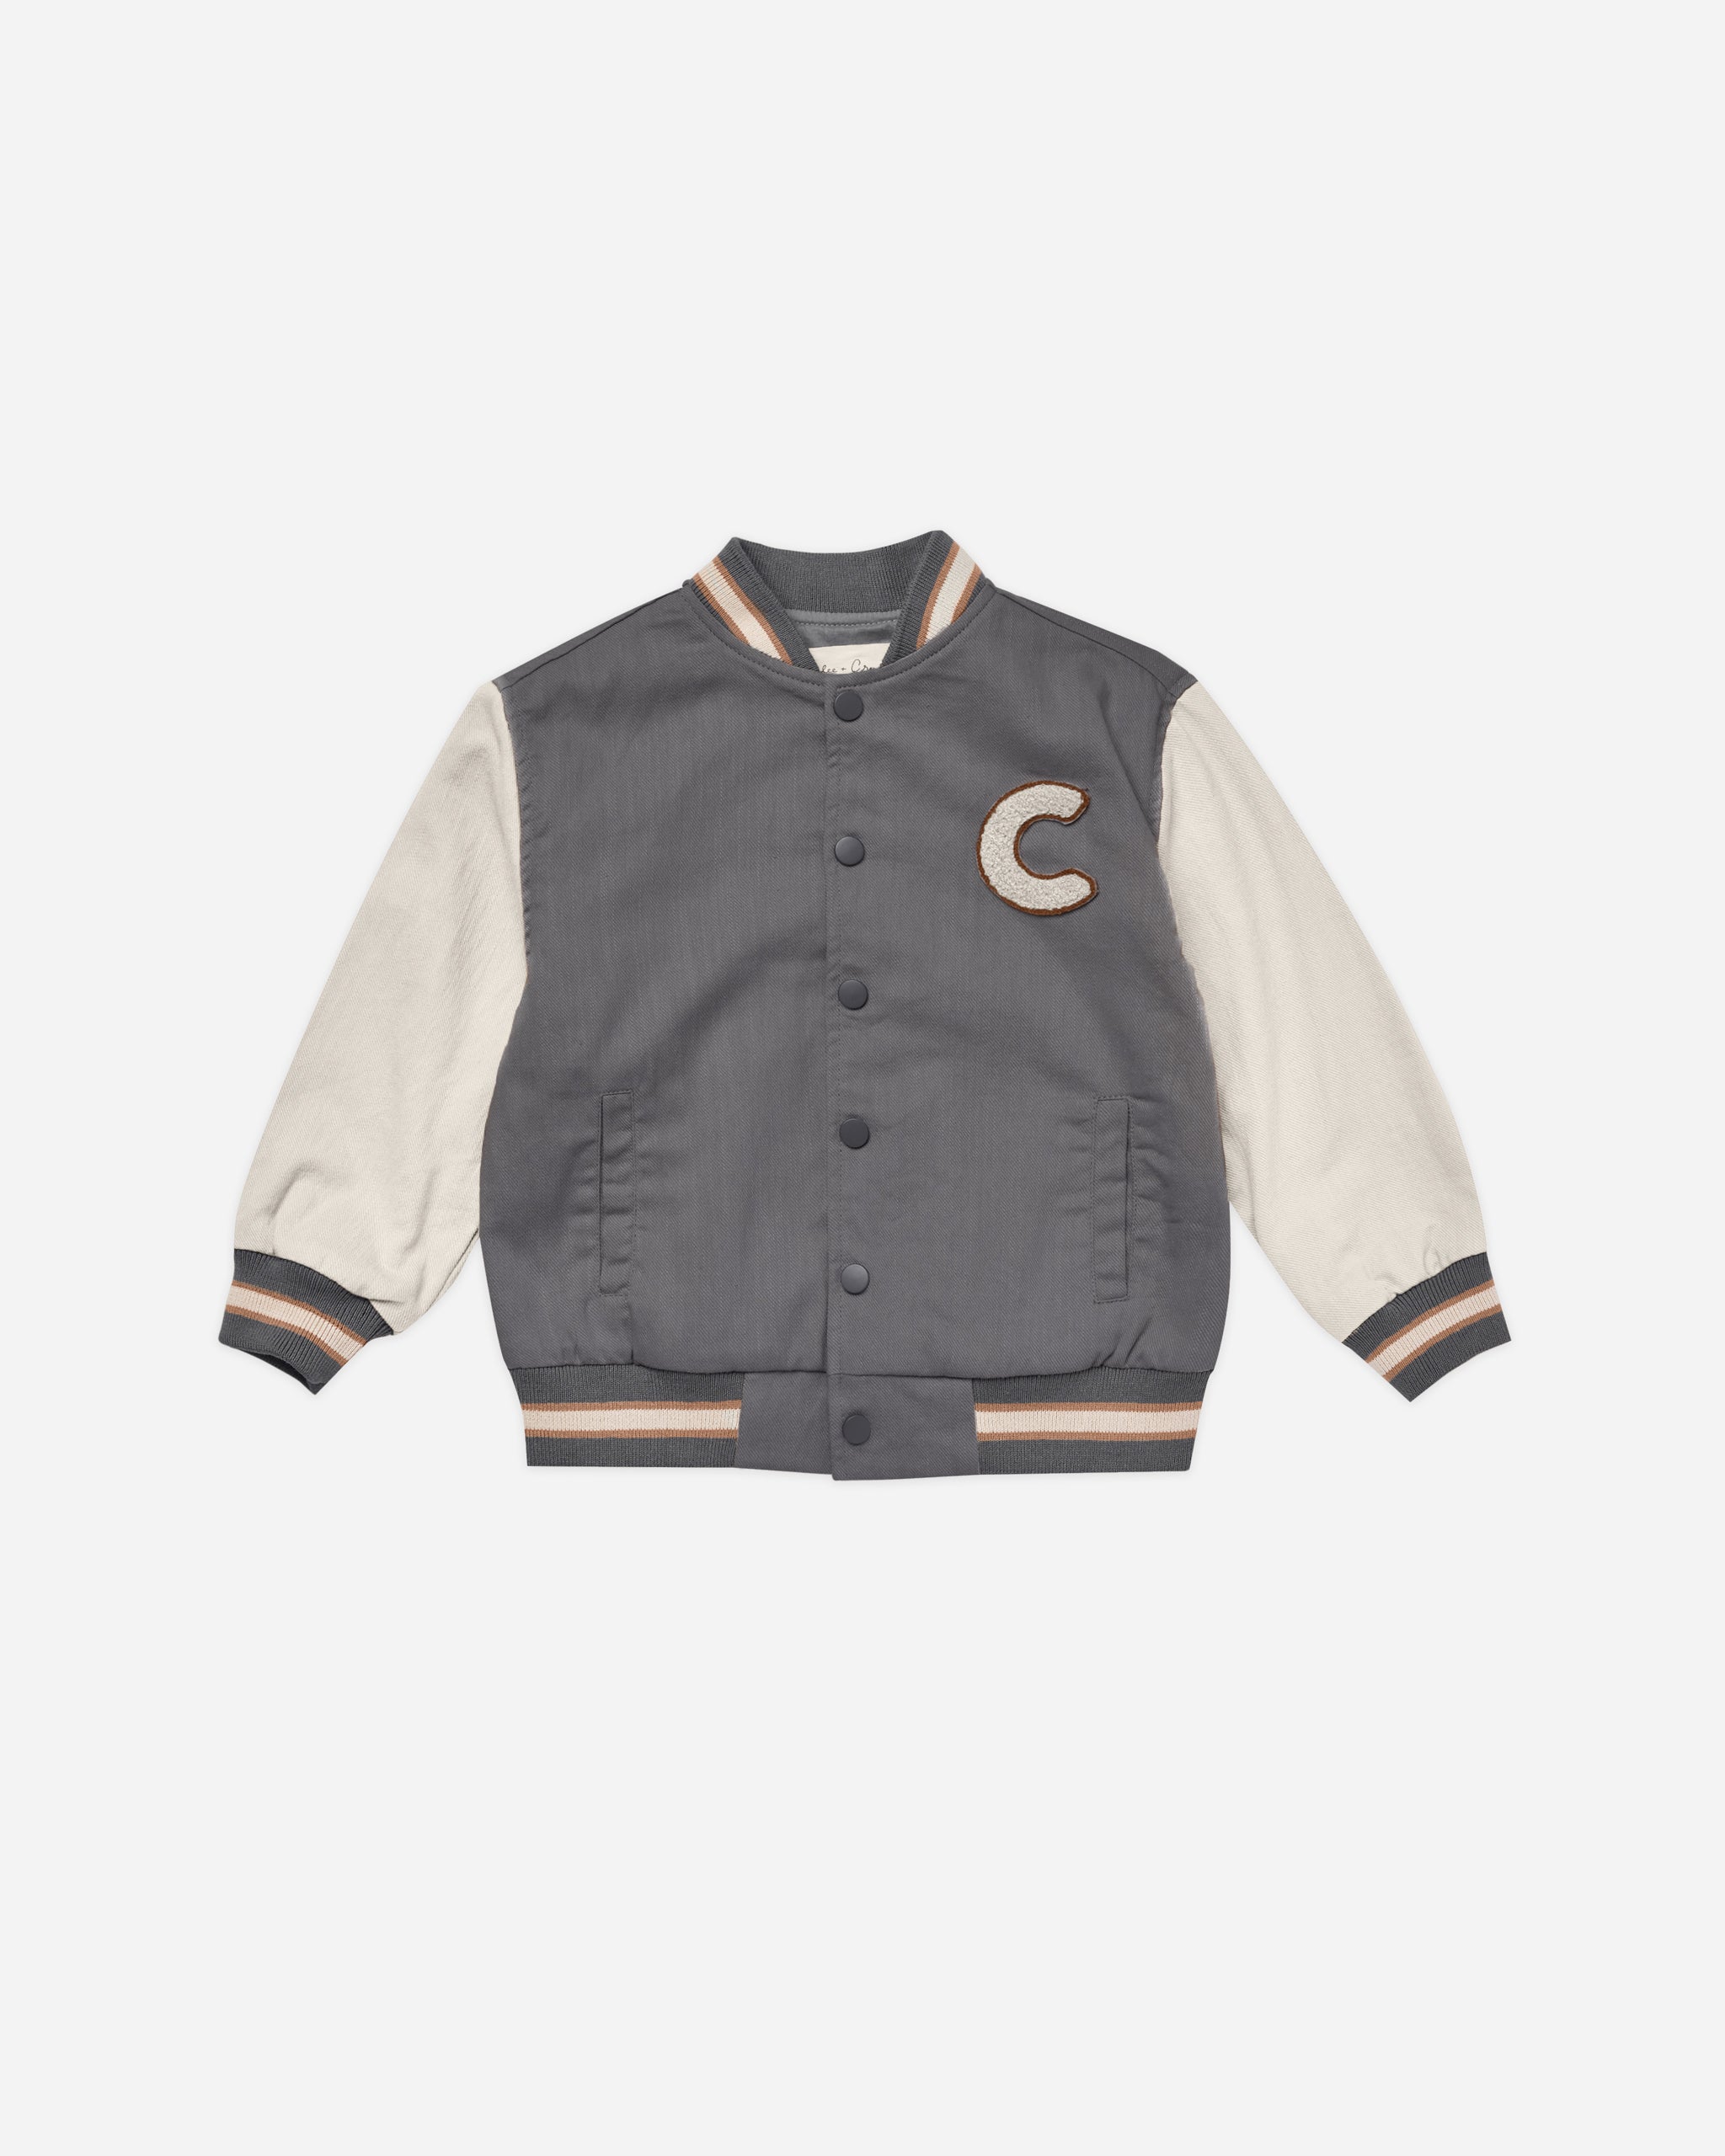 Varsity Jacket || Slate - Rylee + Cru | Kids Clothes | Trendy Baby Clothes | Modern Infant Outfits |